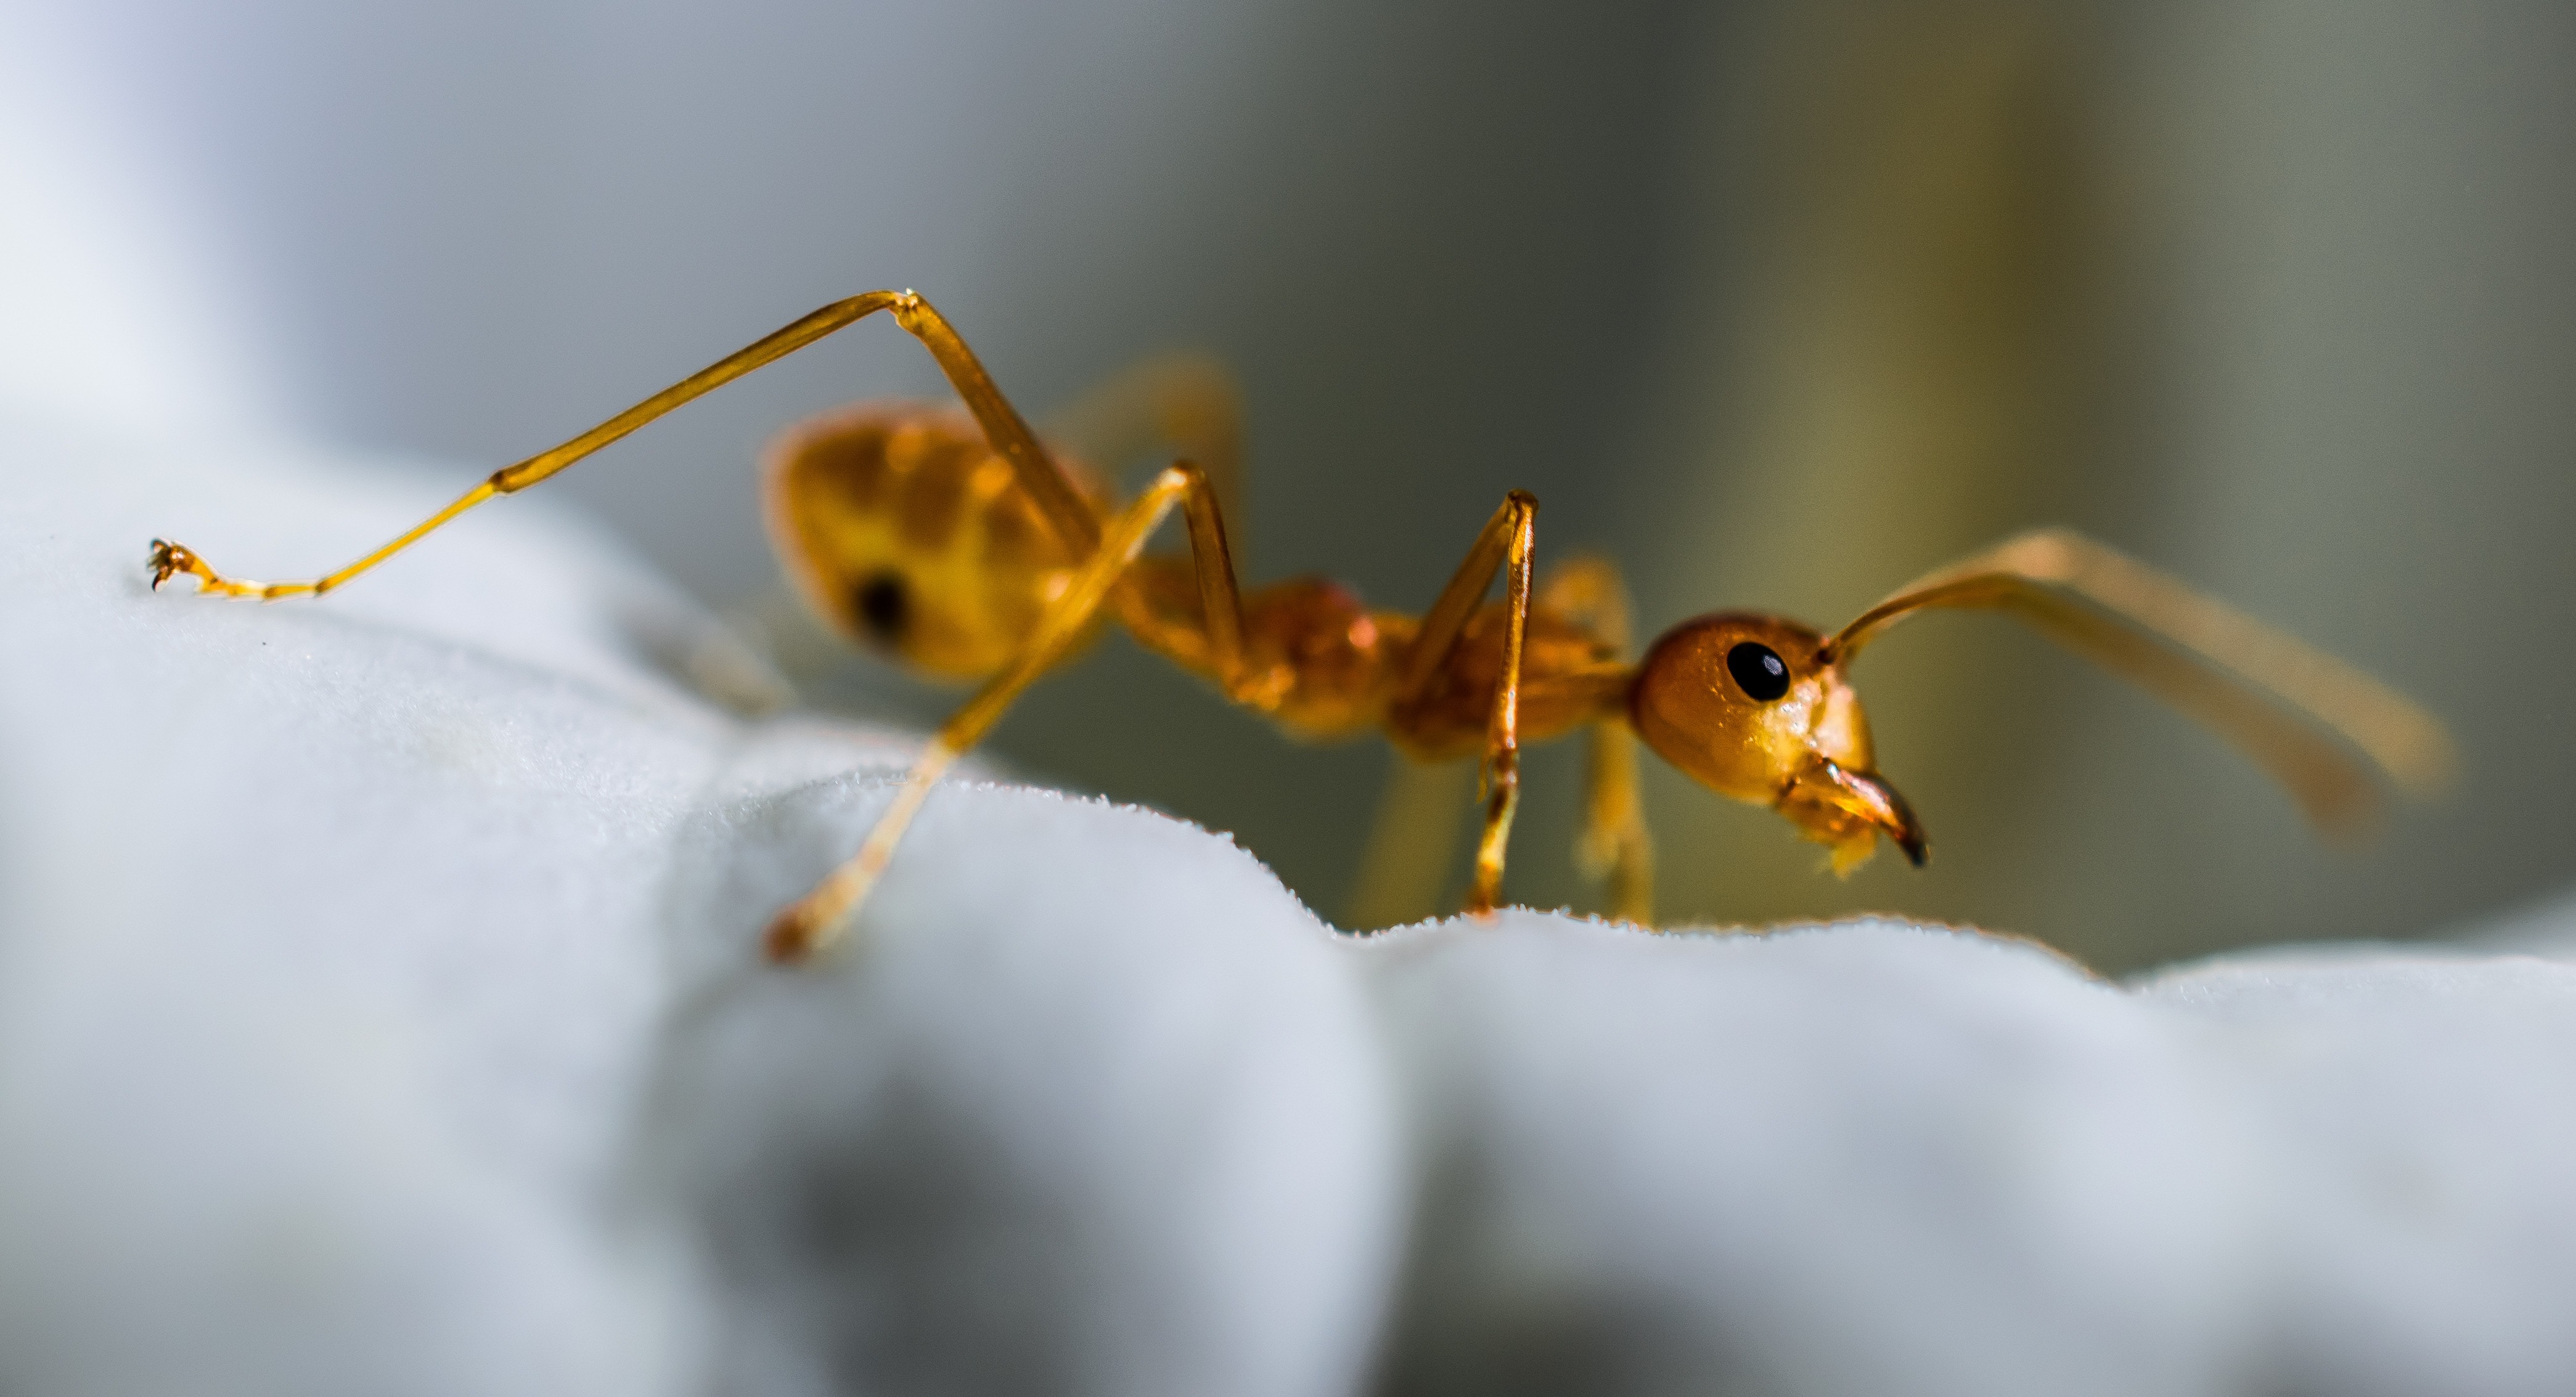 Macro, Red Ant, Ant, Insect, one animal, animal themes